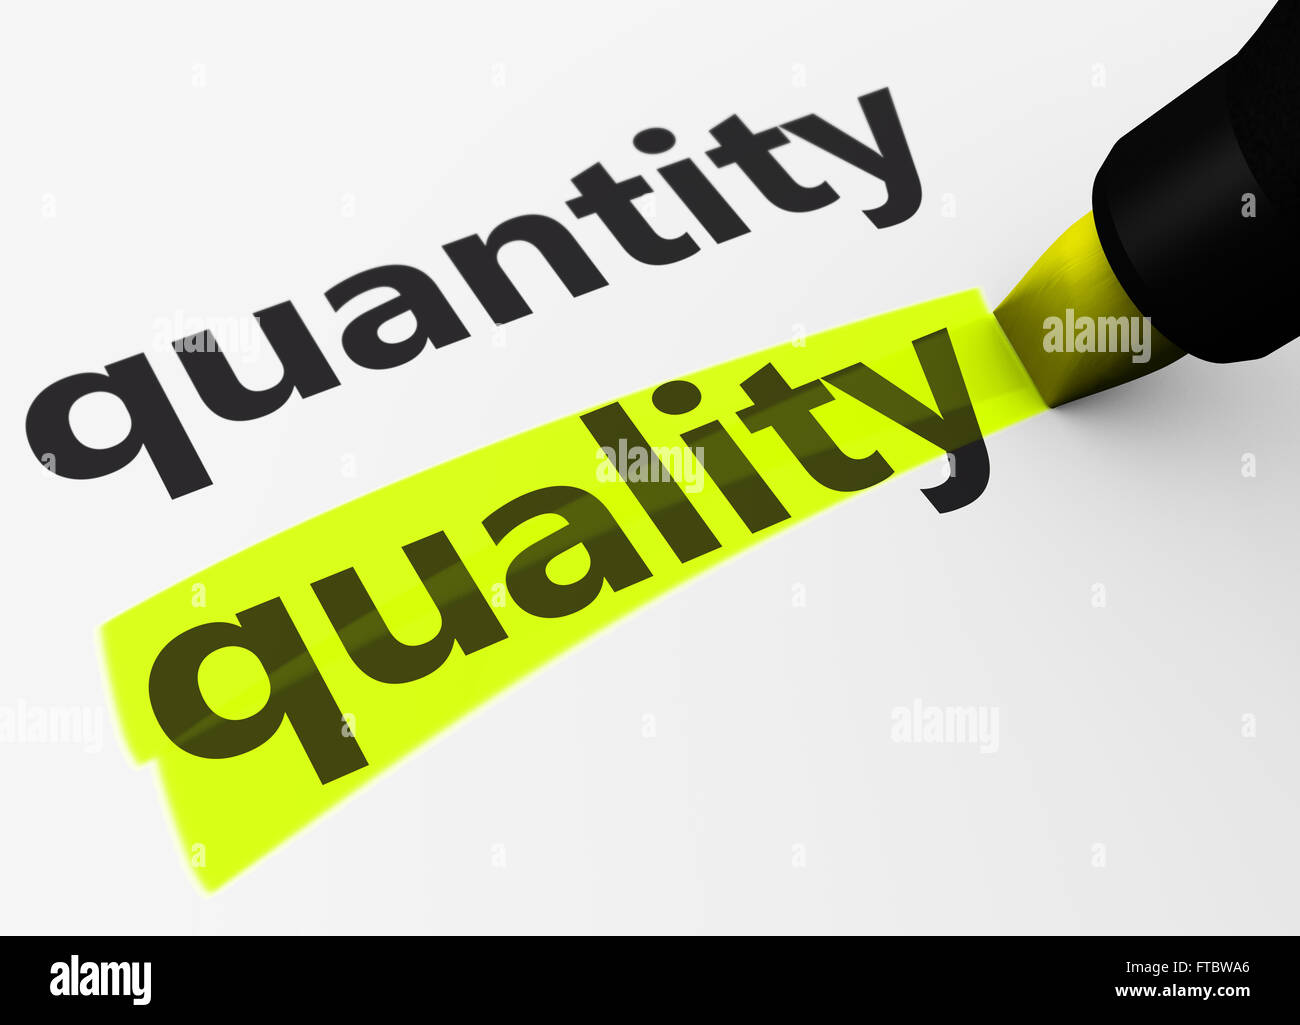 Quality versus quantity business and life concept with a 3D Rendering of words and text highlighted with a yellow marker. Stock Photo